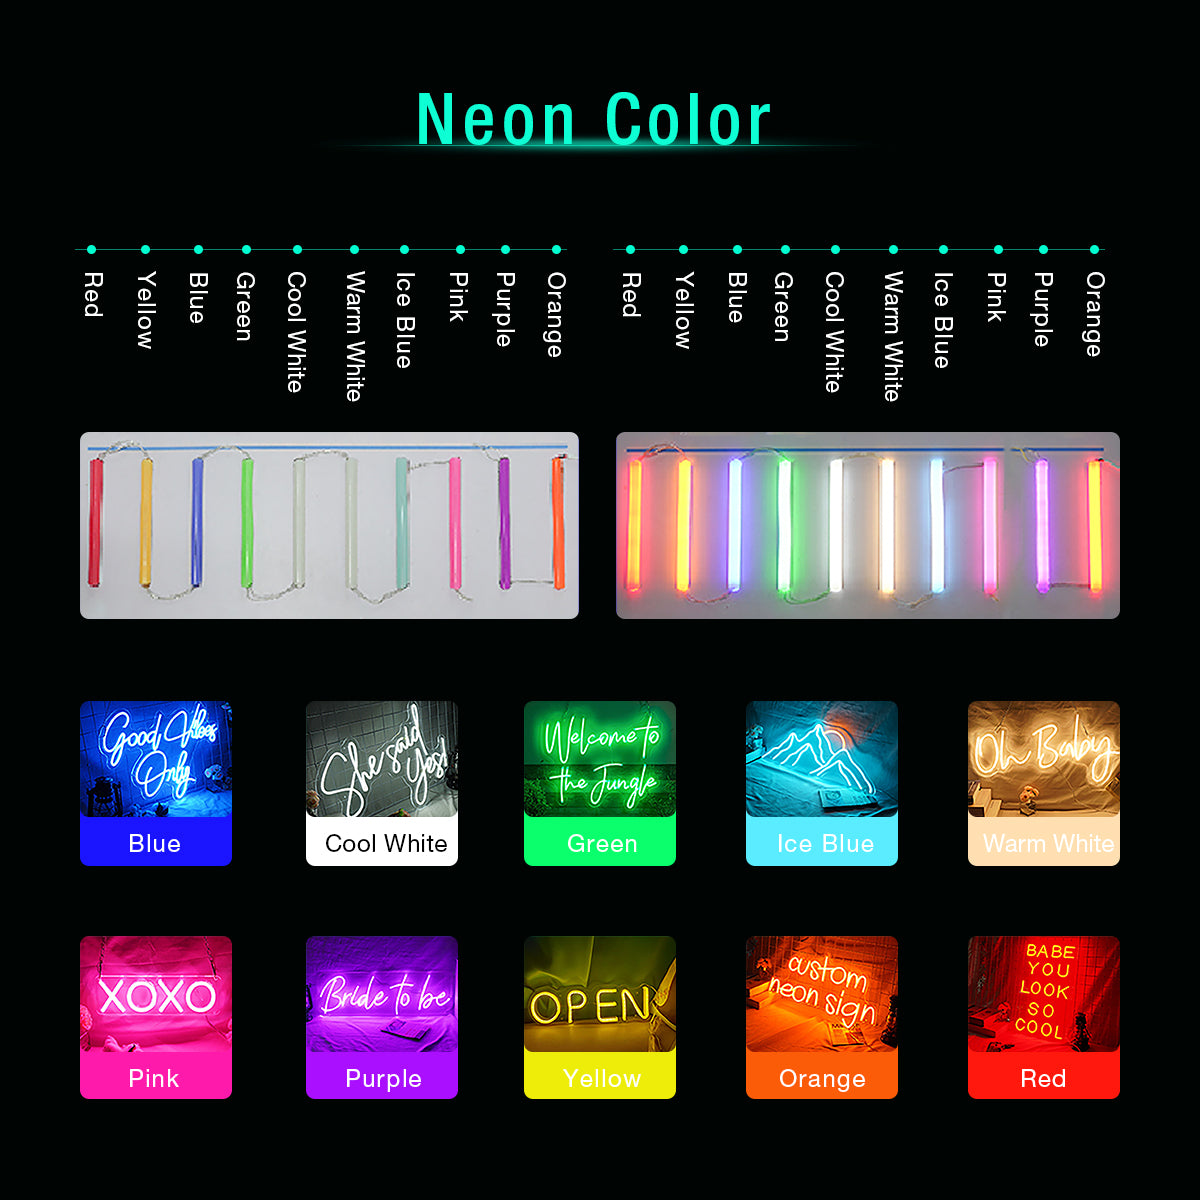 NEONIP-Personalized 100% Handmade Wedding LED Neon Sign with Your Names and Date